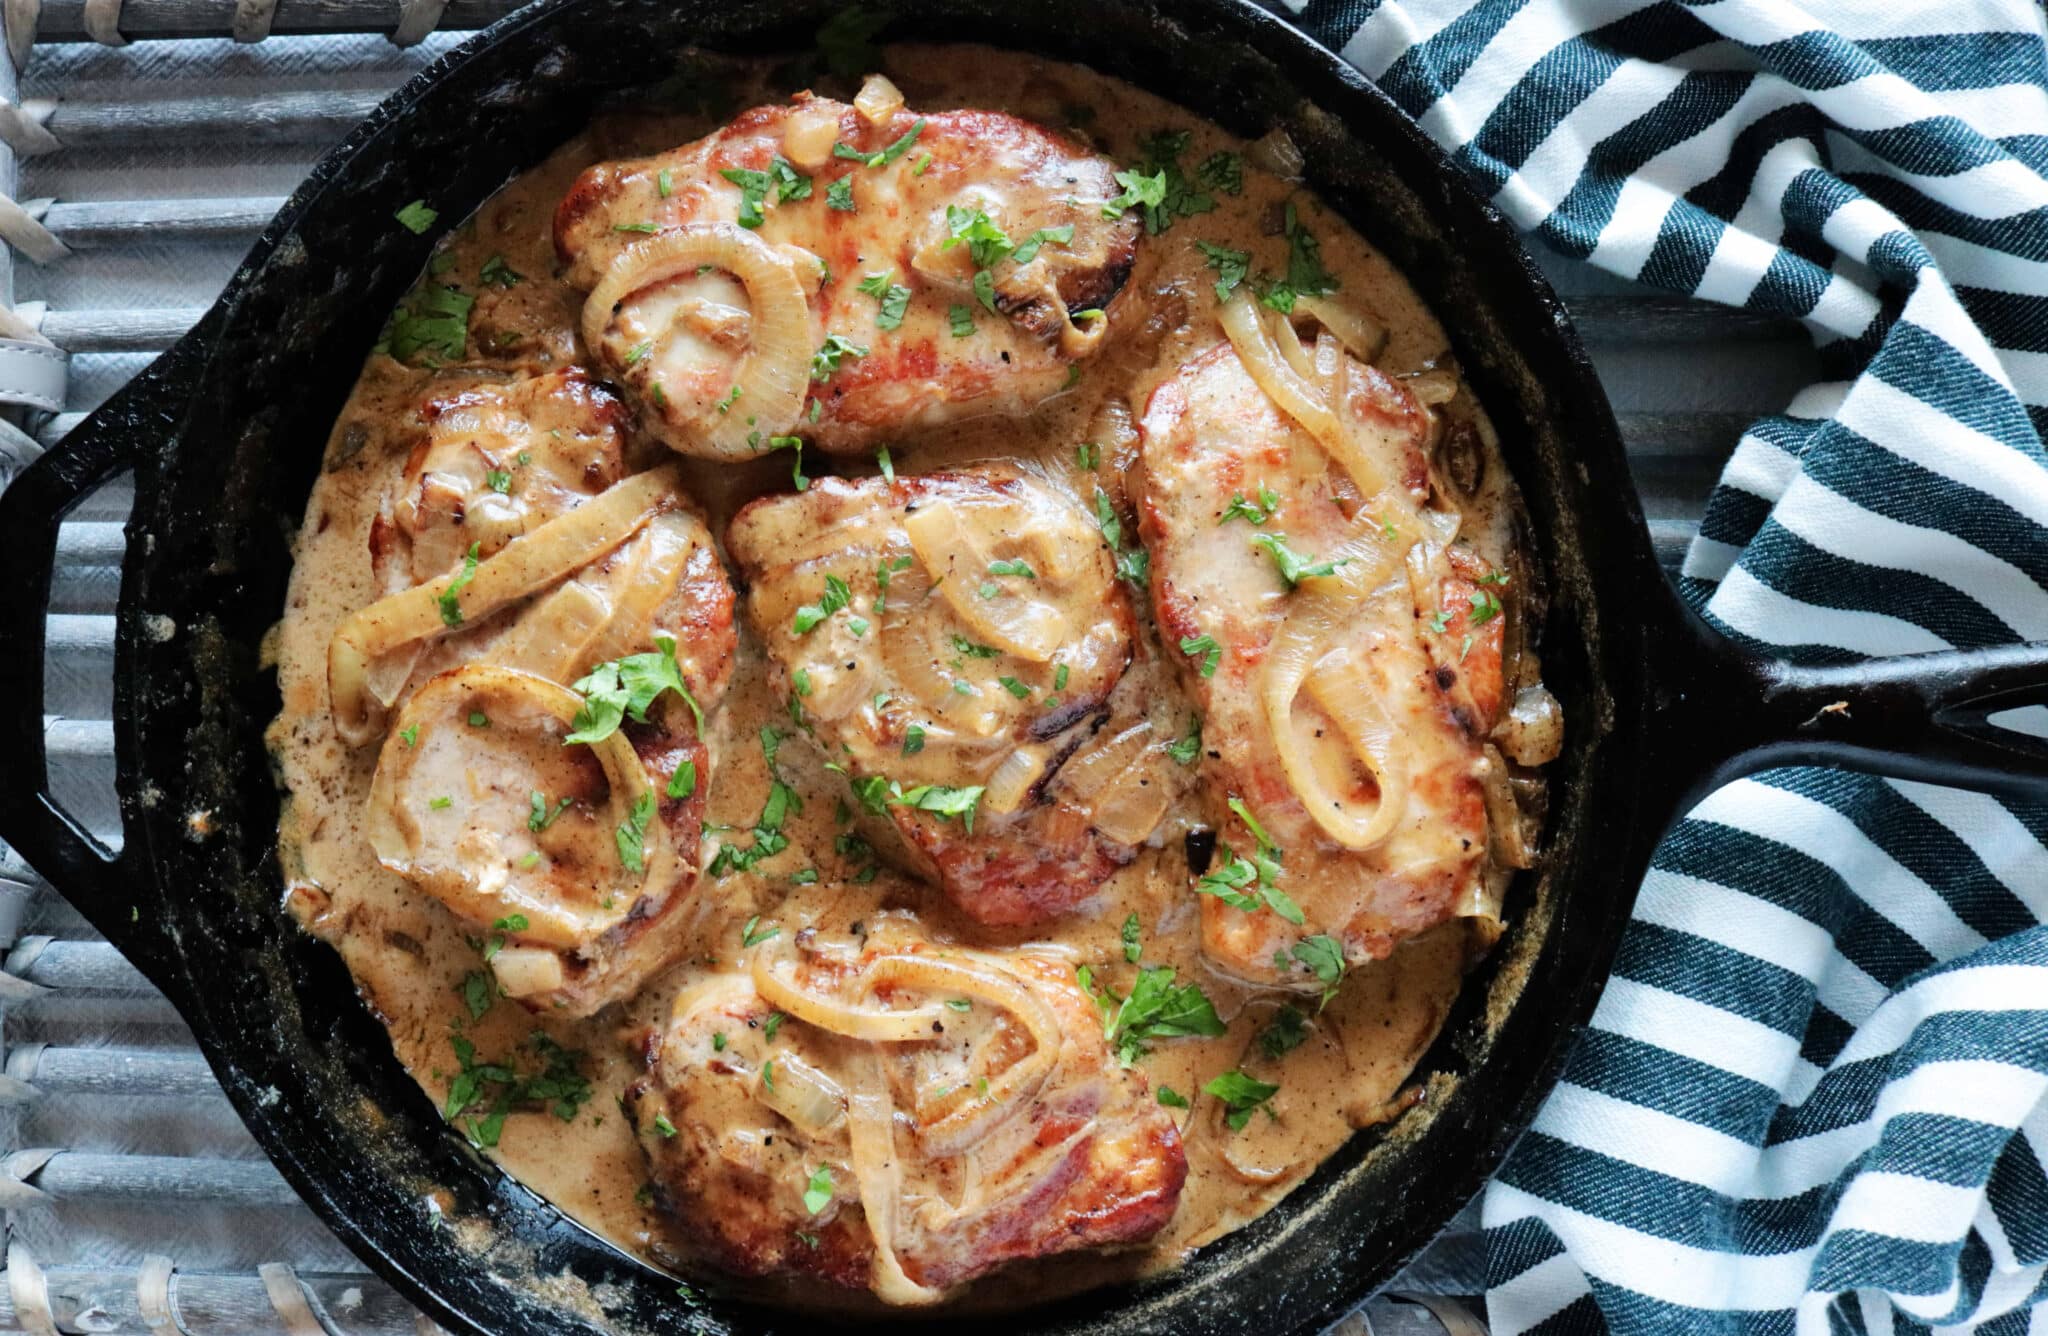 Smothered Pork Chops with Gravy - The Anthony Kitchen